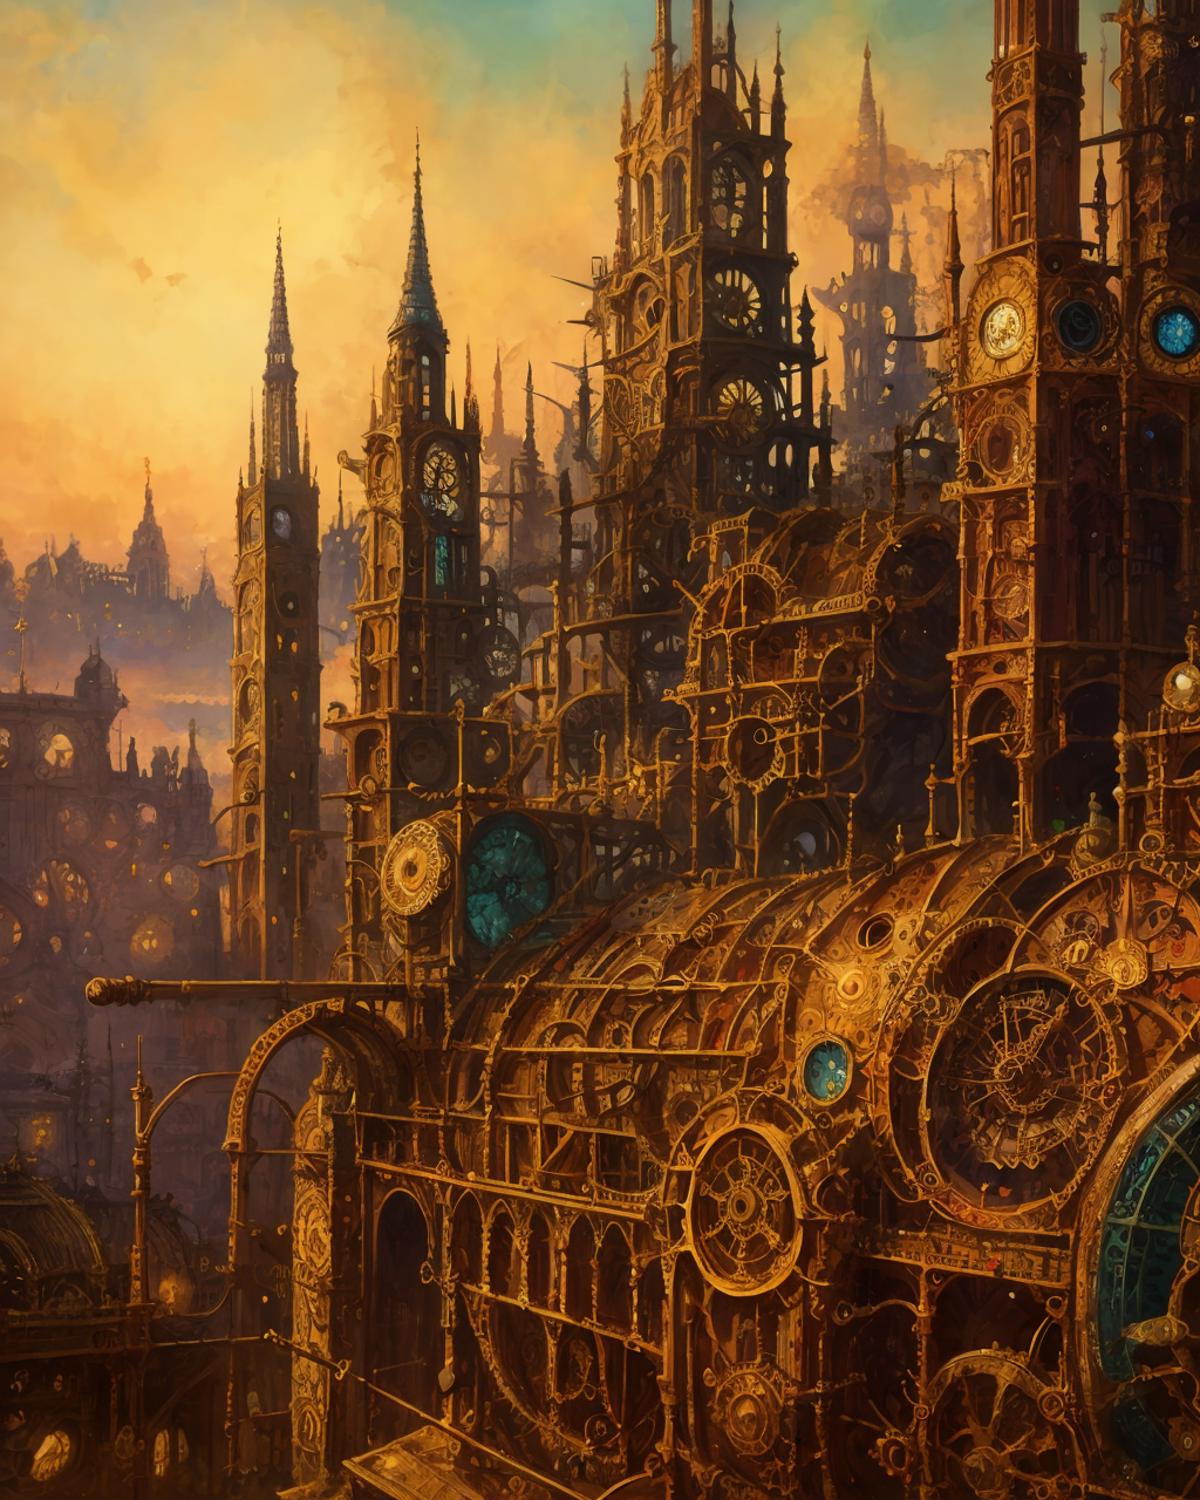 A fantastical cityscape with ancient clock towers and a large mechanical structure.